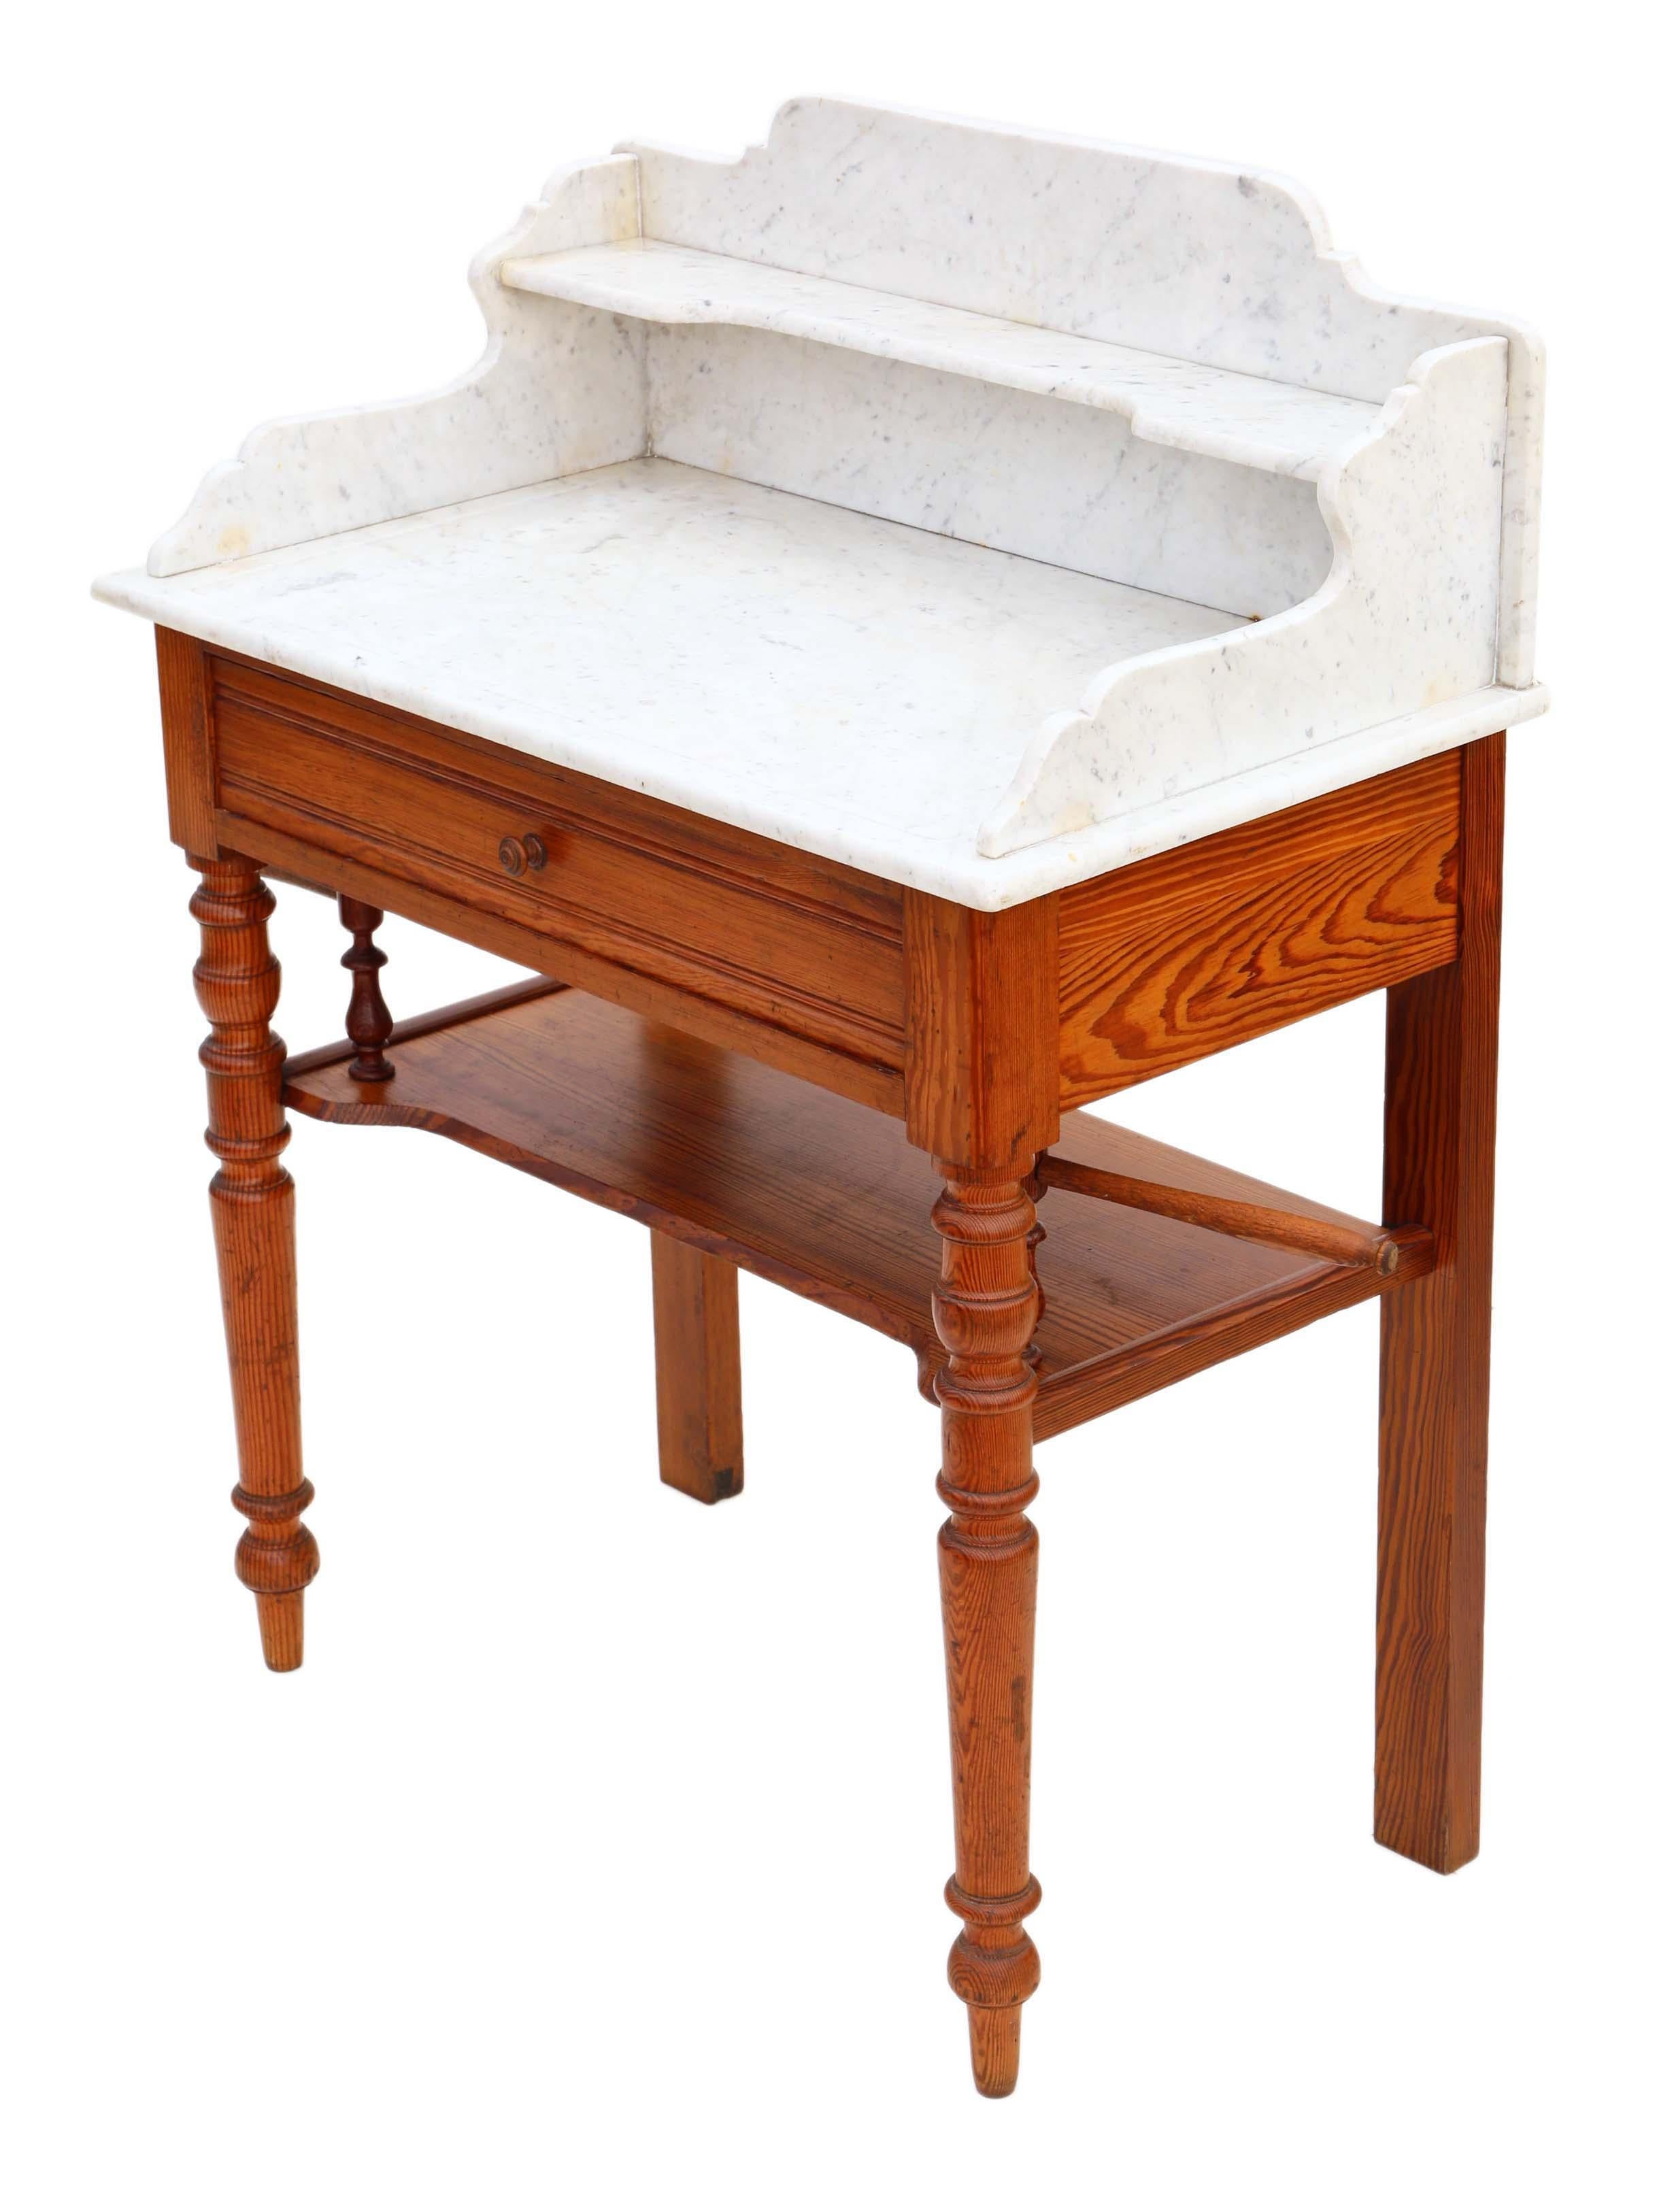 Early 20th Century Antique Fine Quality Pitch Pine and Marble Wash Stand C1900 Compact Proportions